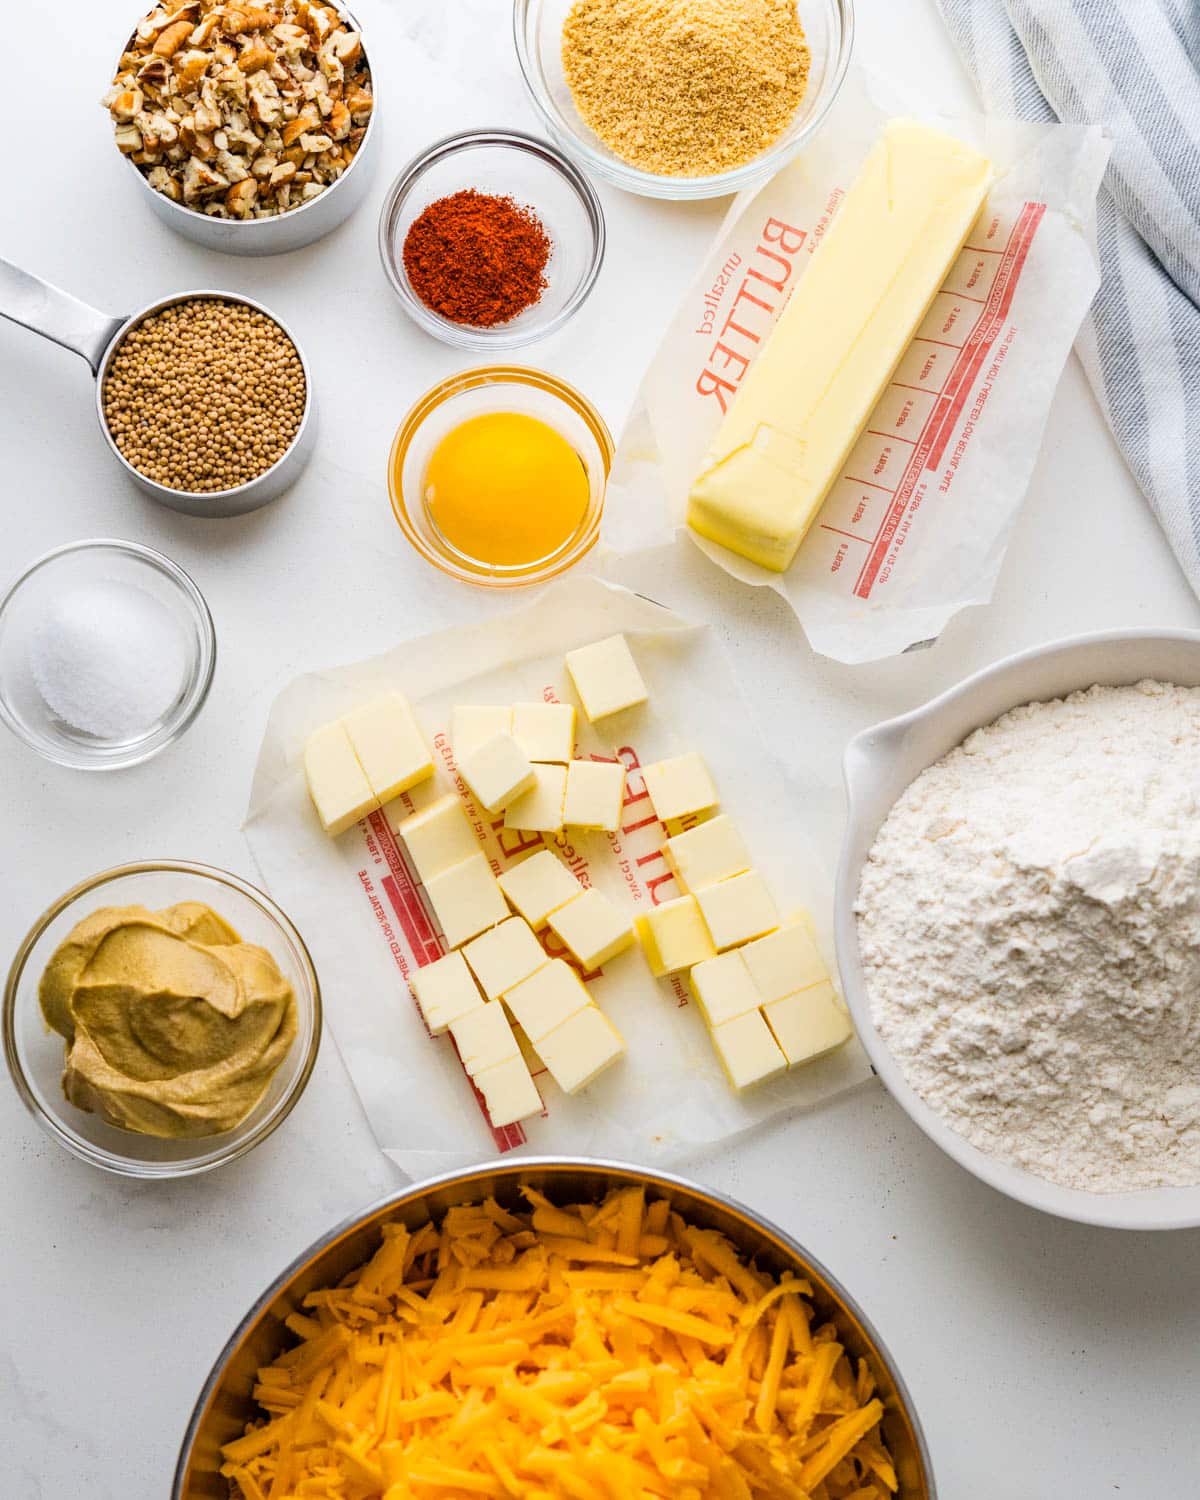 Ingredients for the cheddar crackers.